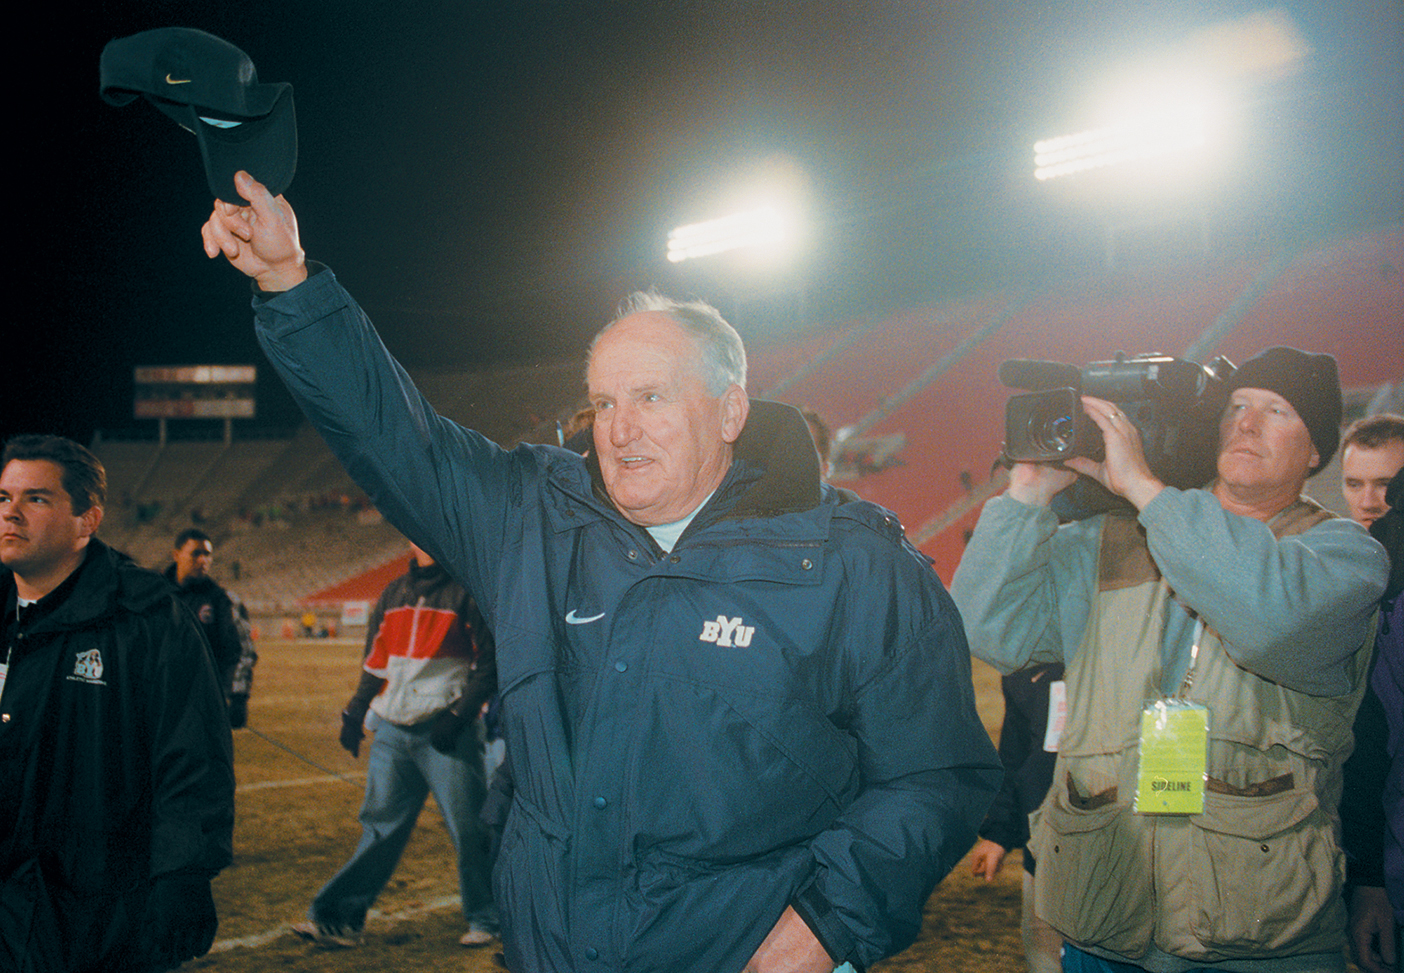 LaVell Edwards waves to fans after a game on the football field